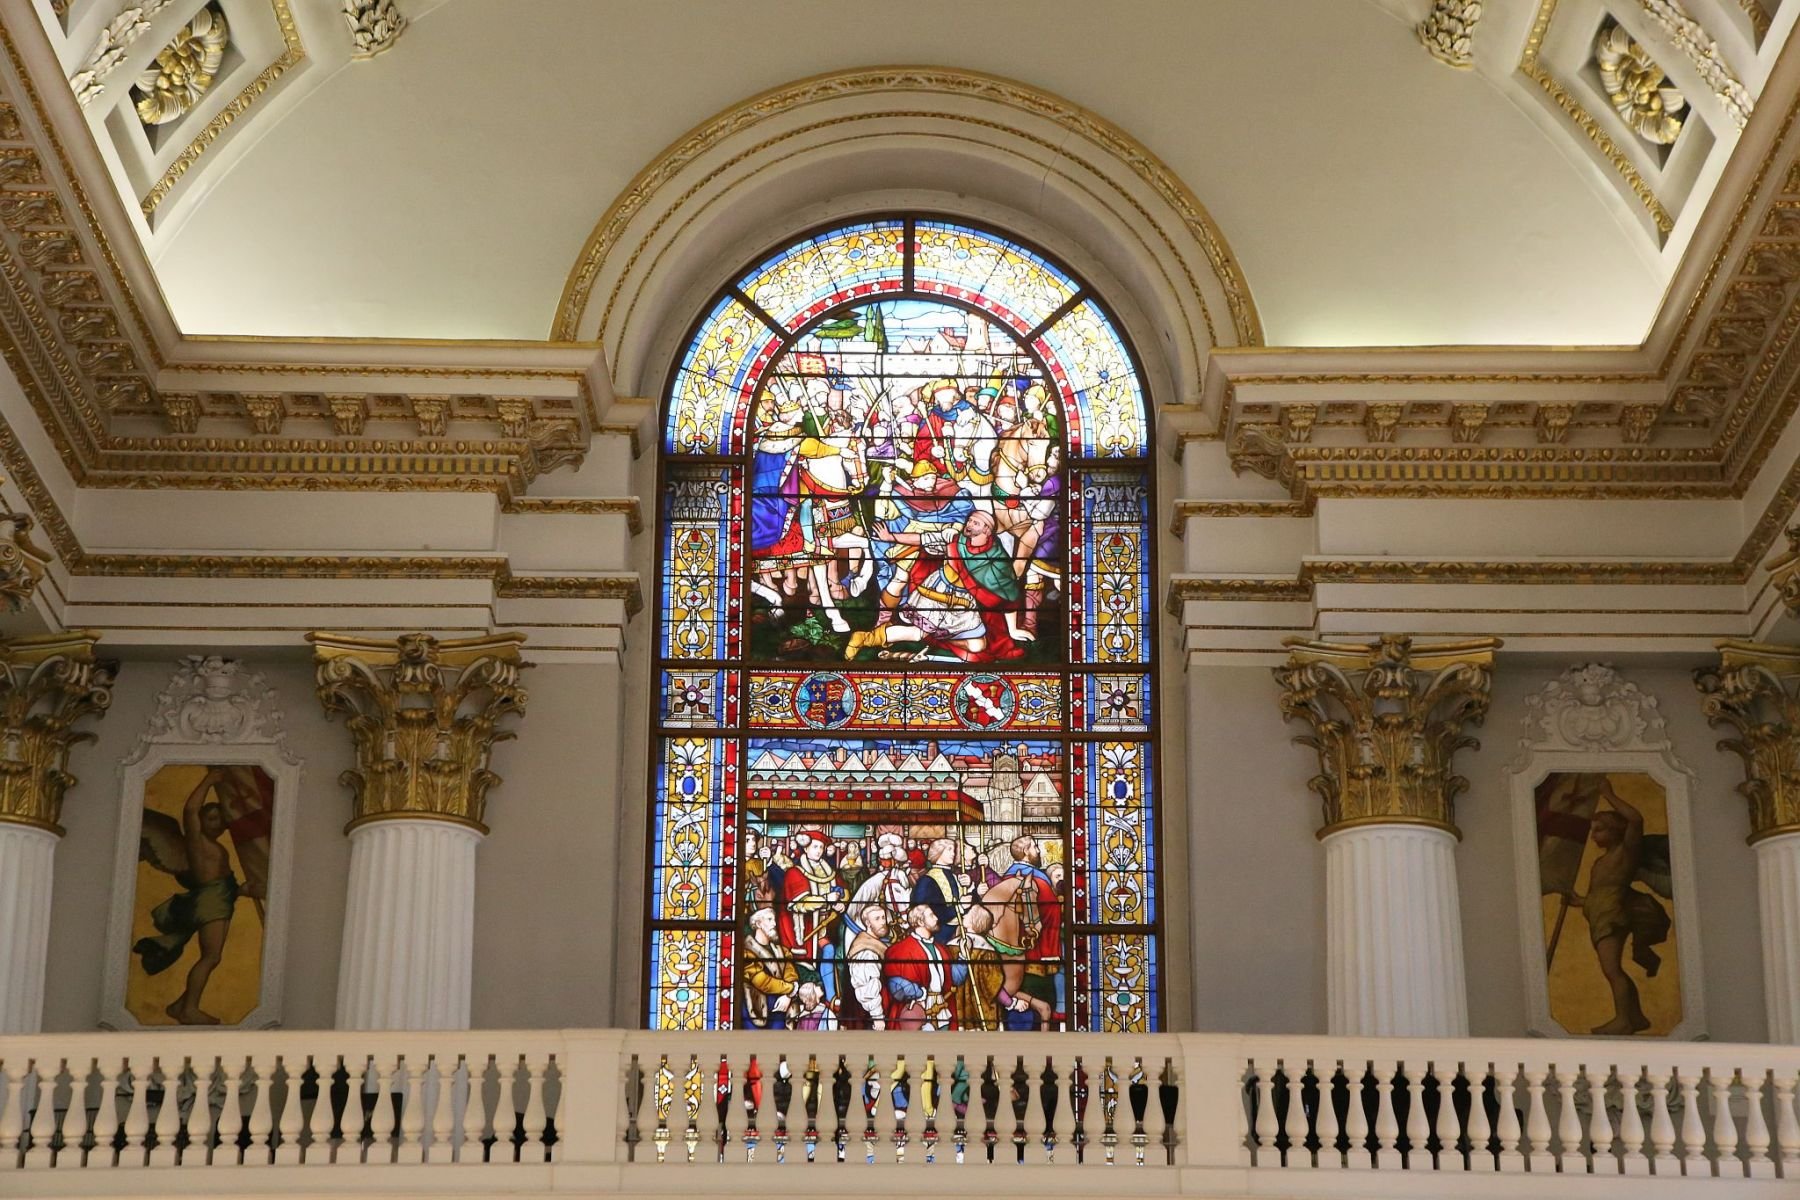 Stained glass window in The Egyptian Room at The Mansion House, home to the Lord Mayor of the City of London.